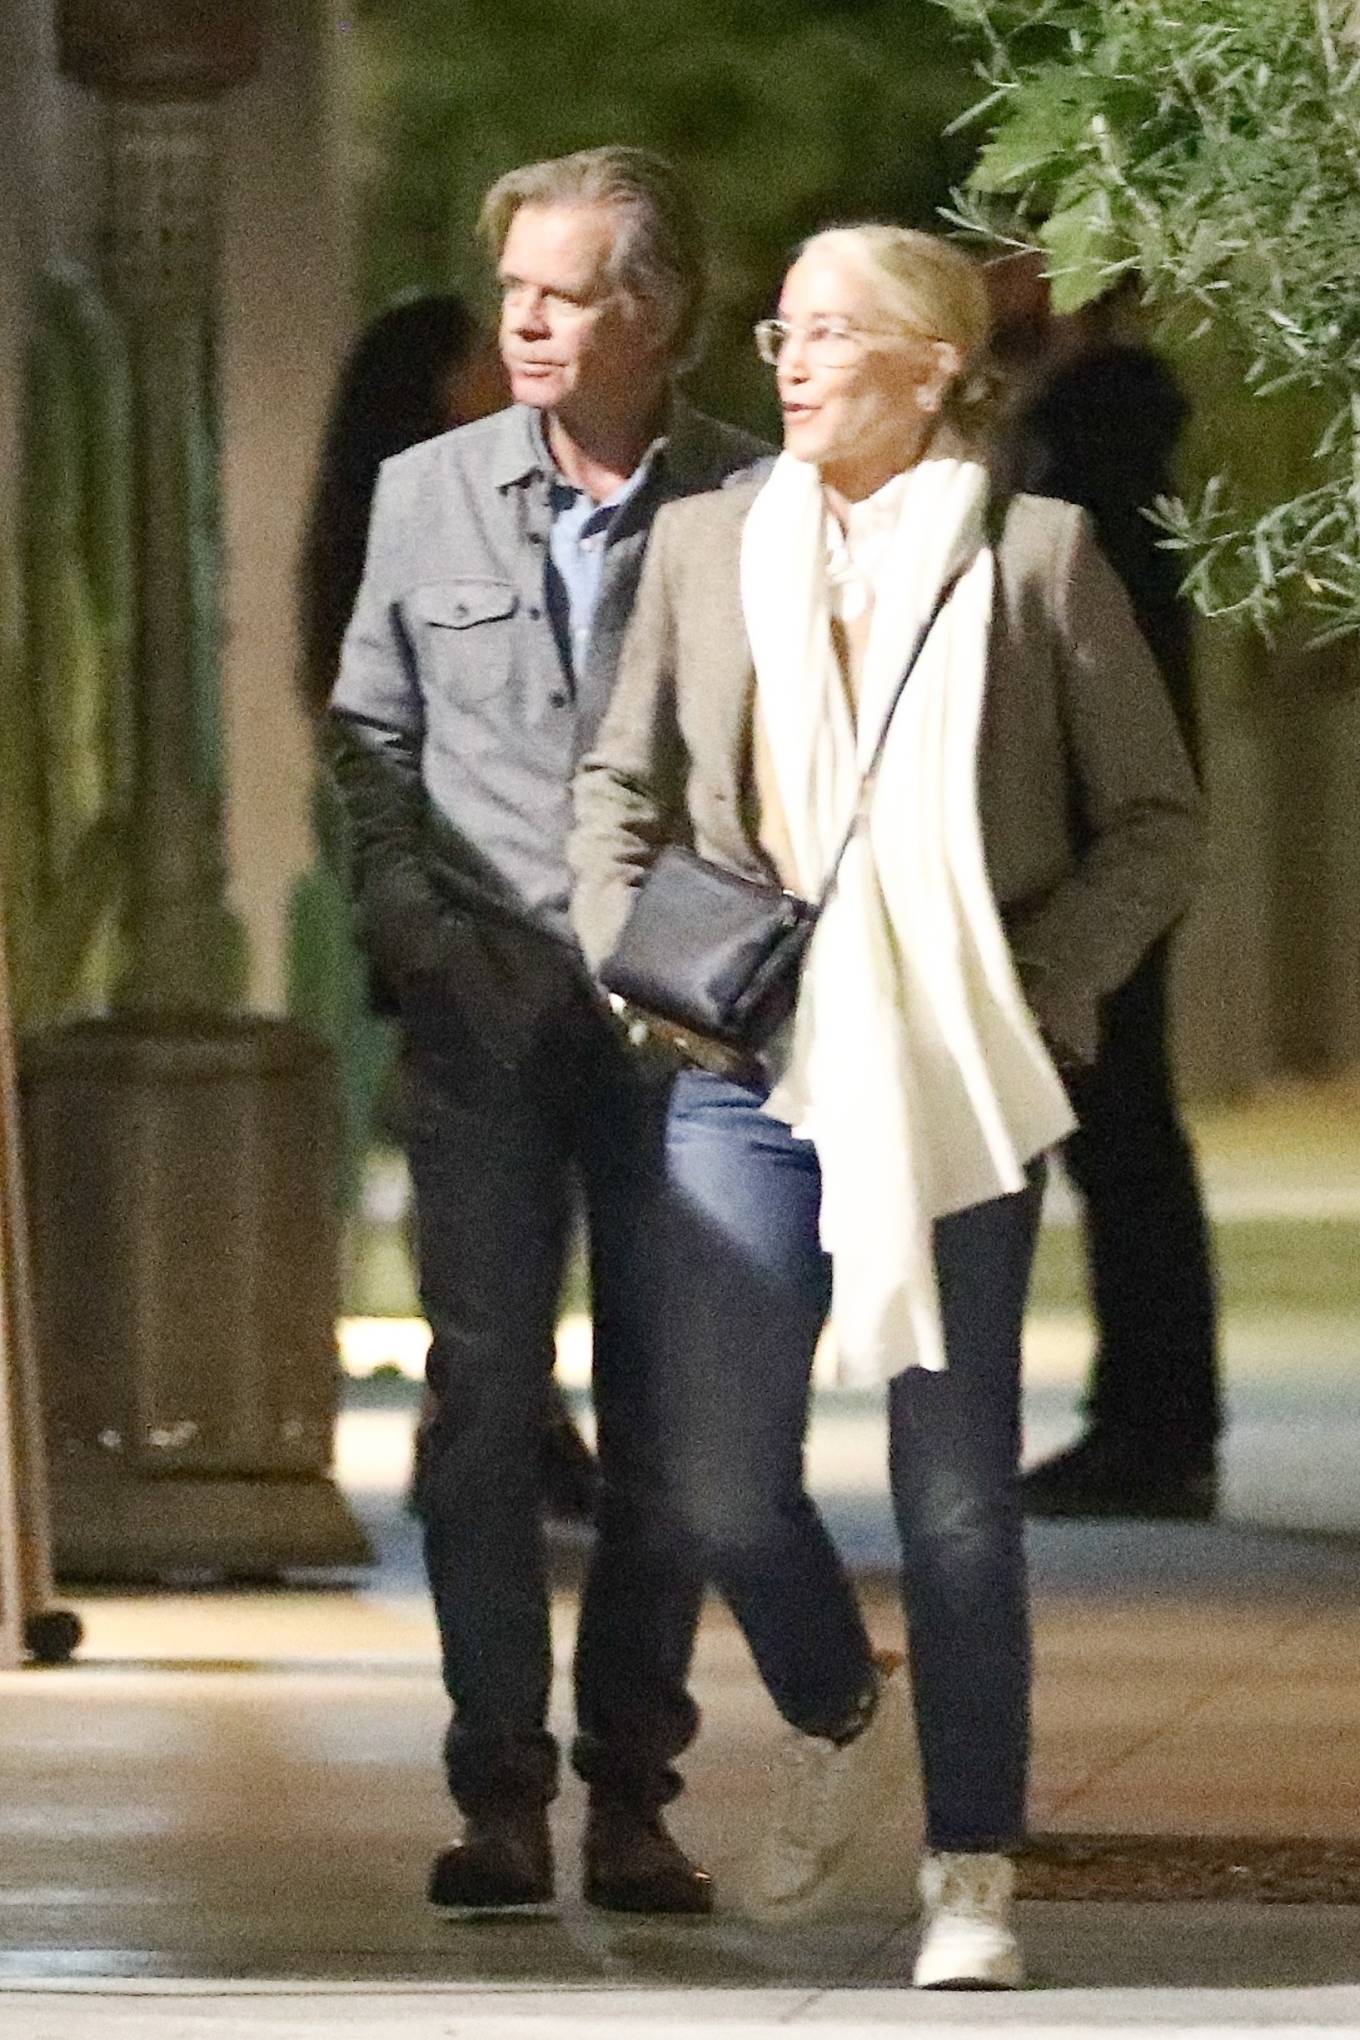 Felicity Huffman - With William H. Macy leaving a double date dinner in Hollywood